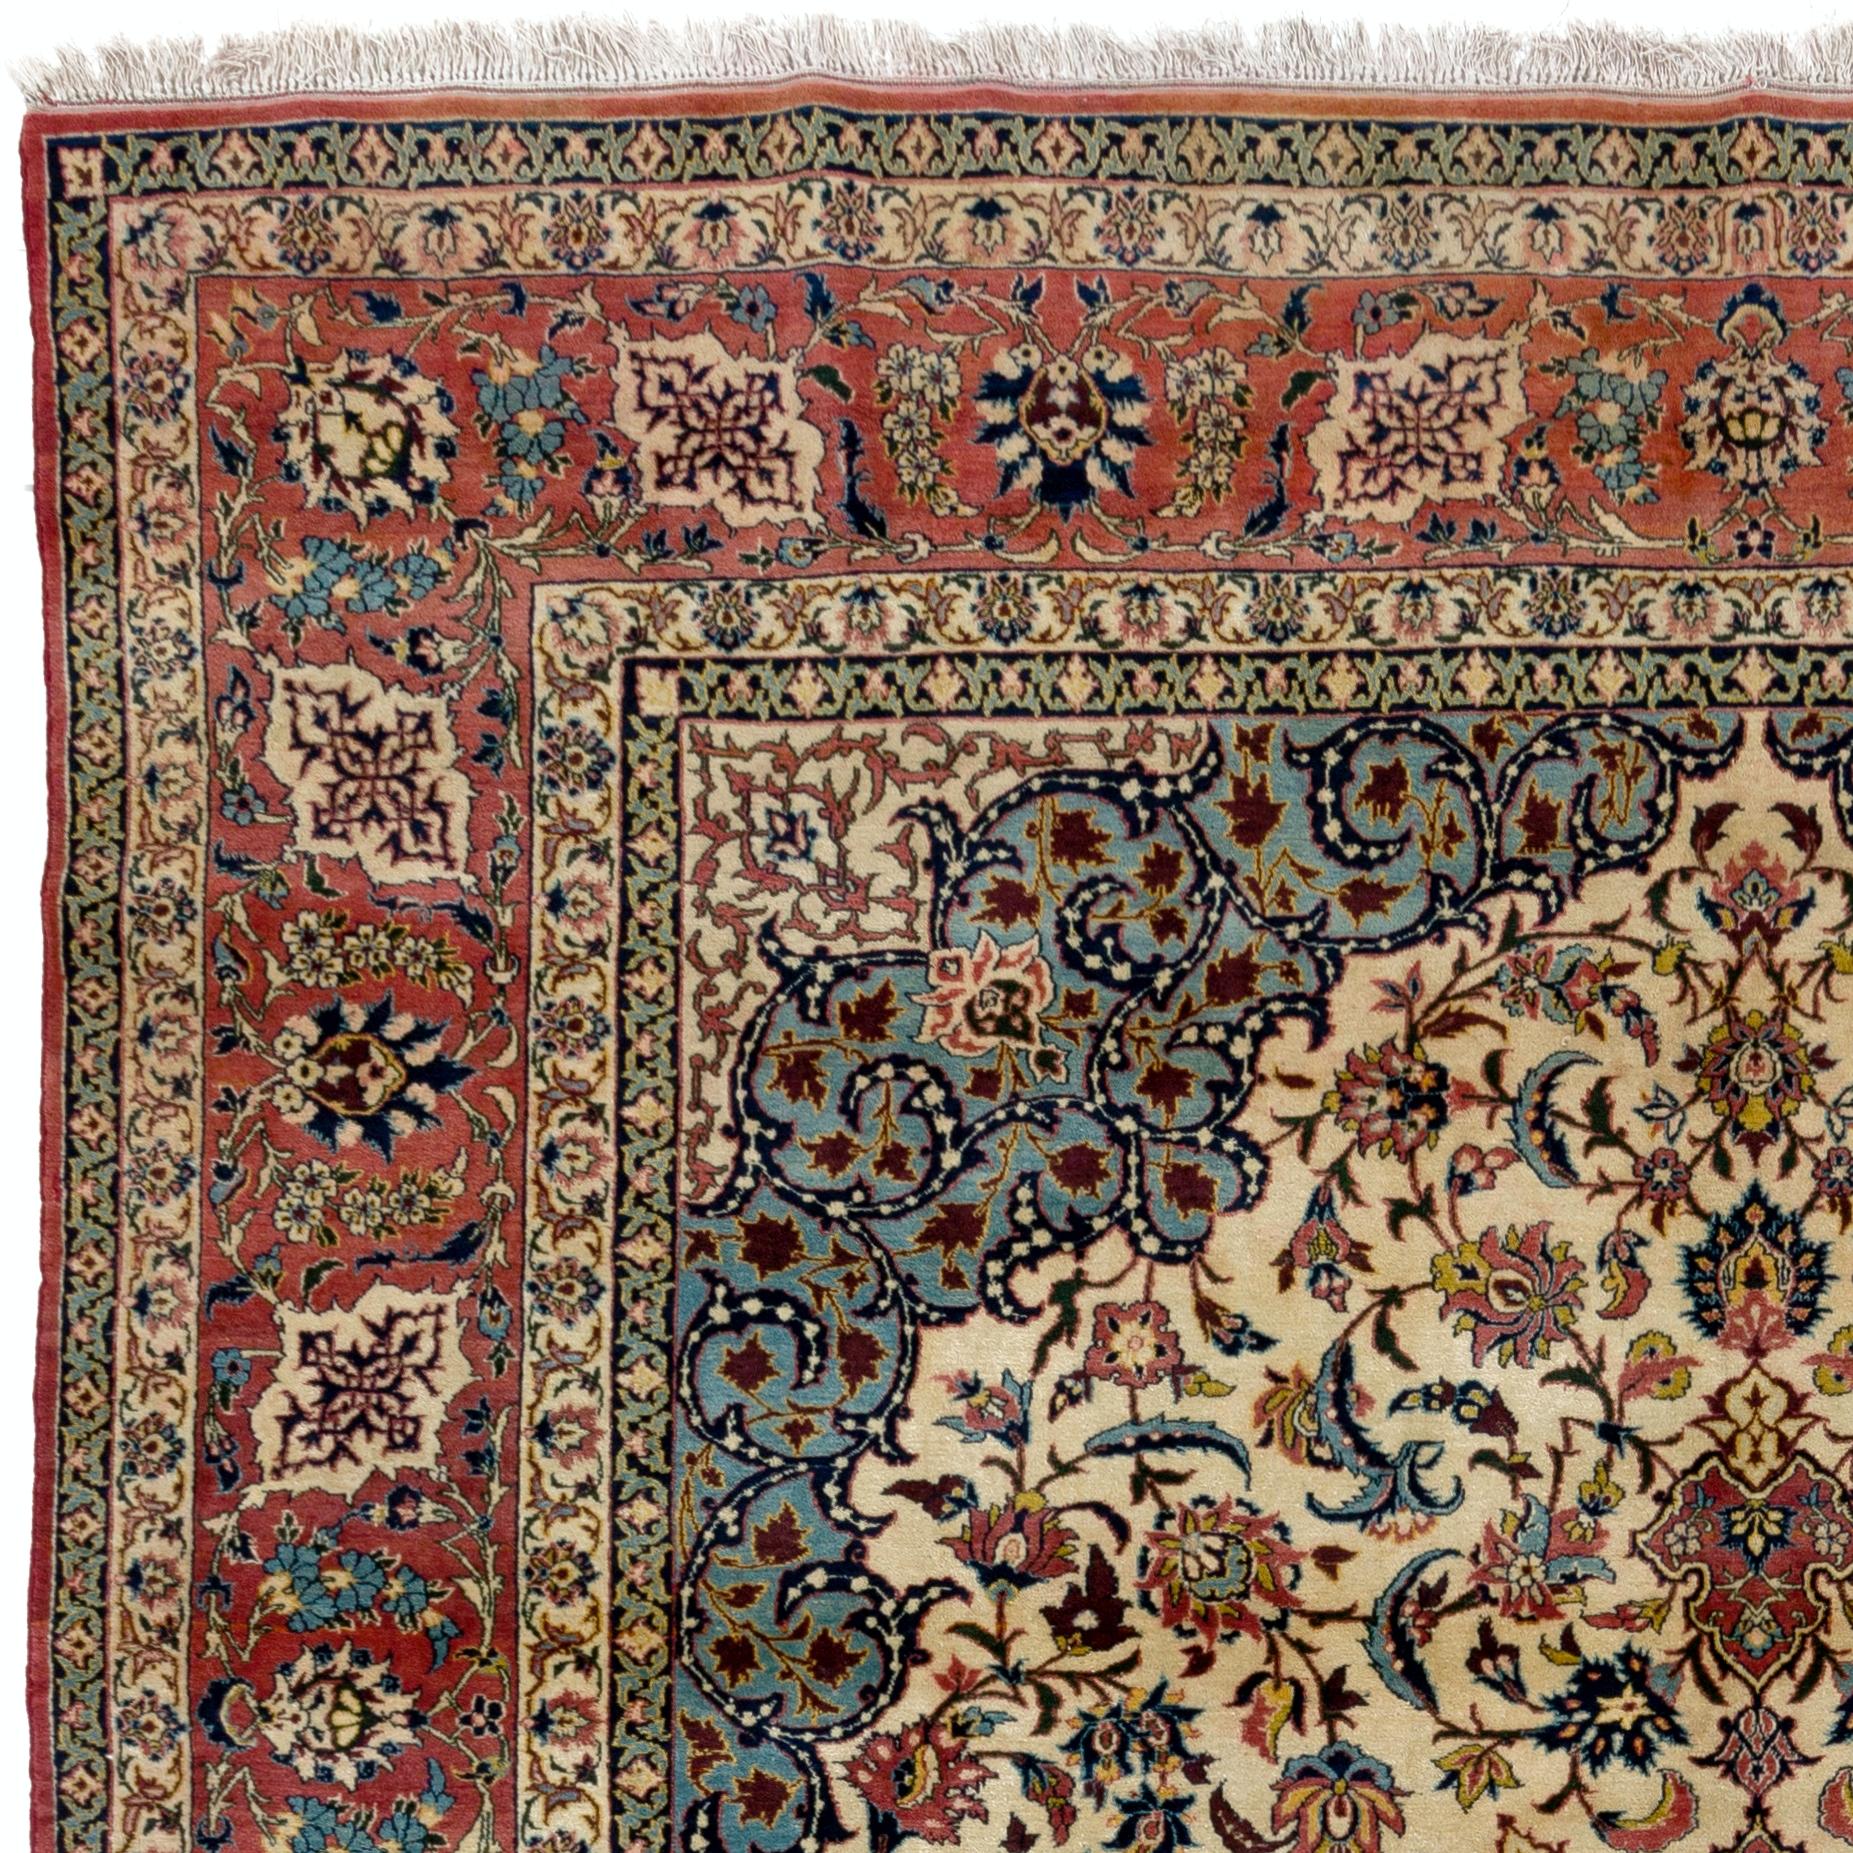 This elegant rug features an ivory field richly decorated with scrolling floral vines centered by a cusped brick red/brown medallion flanked at each end with large palmettes enclosed by sky blue spandrels with a large border of palmettes and